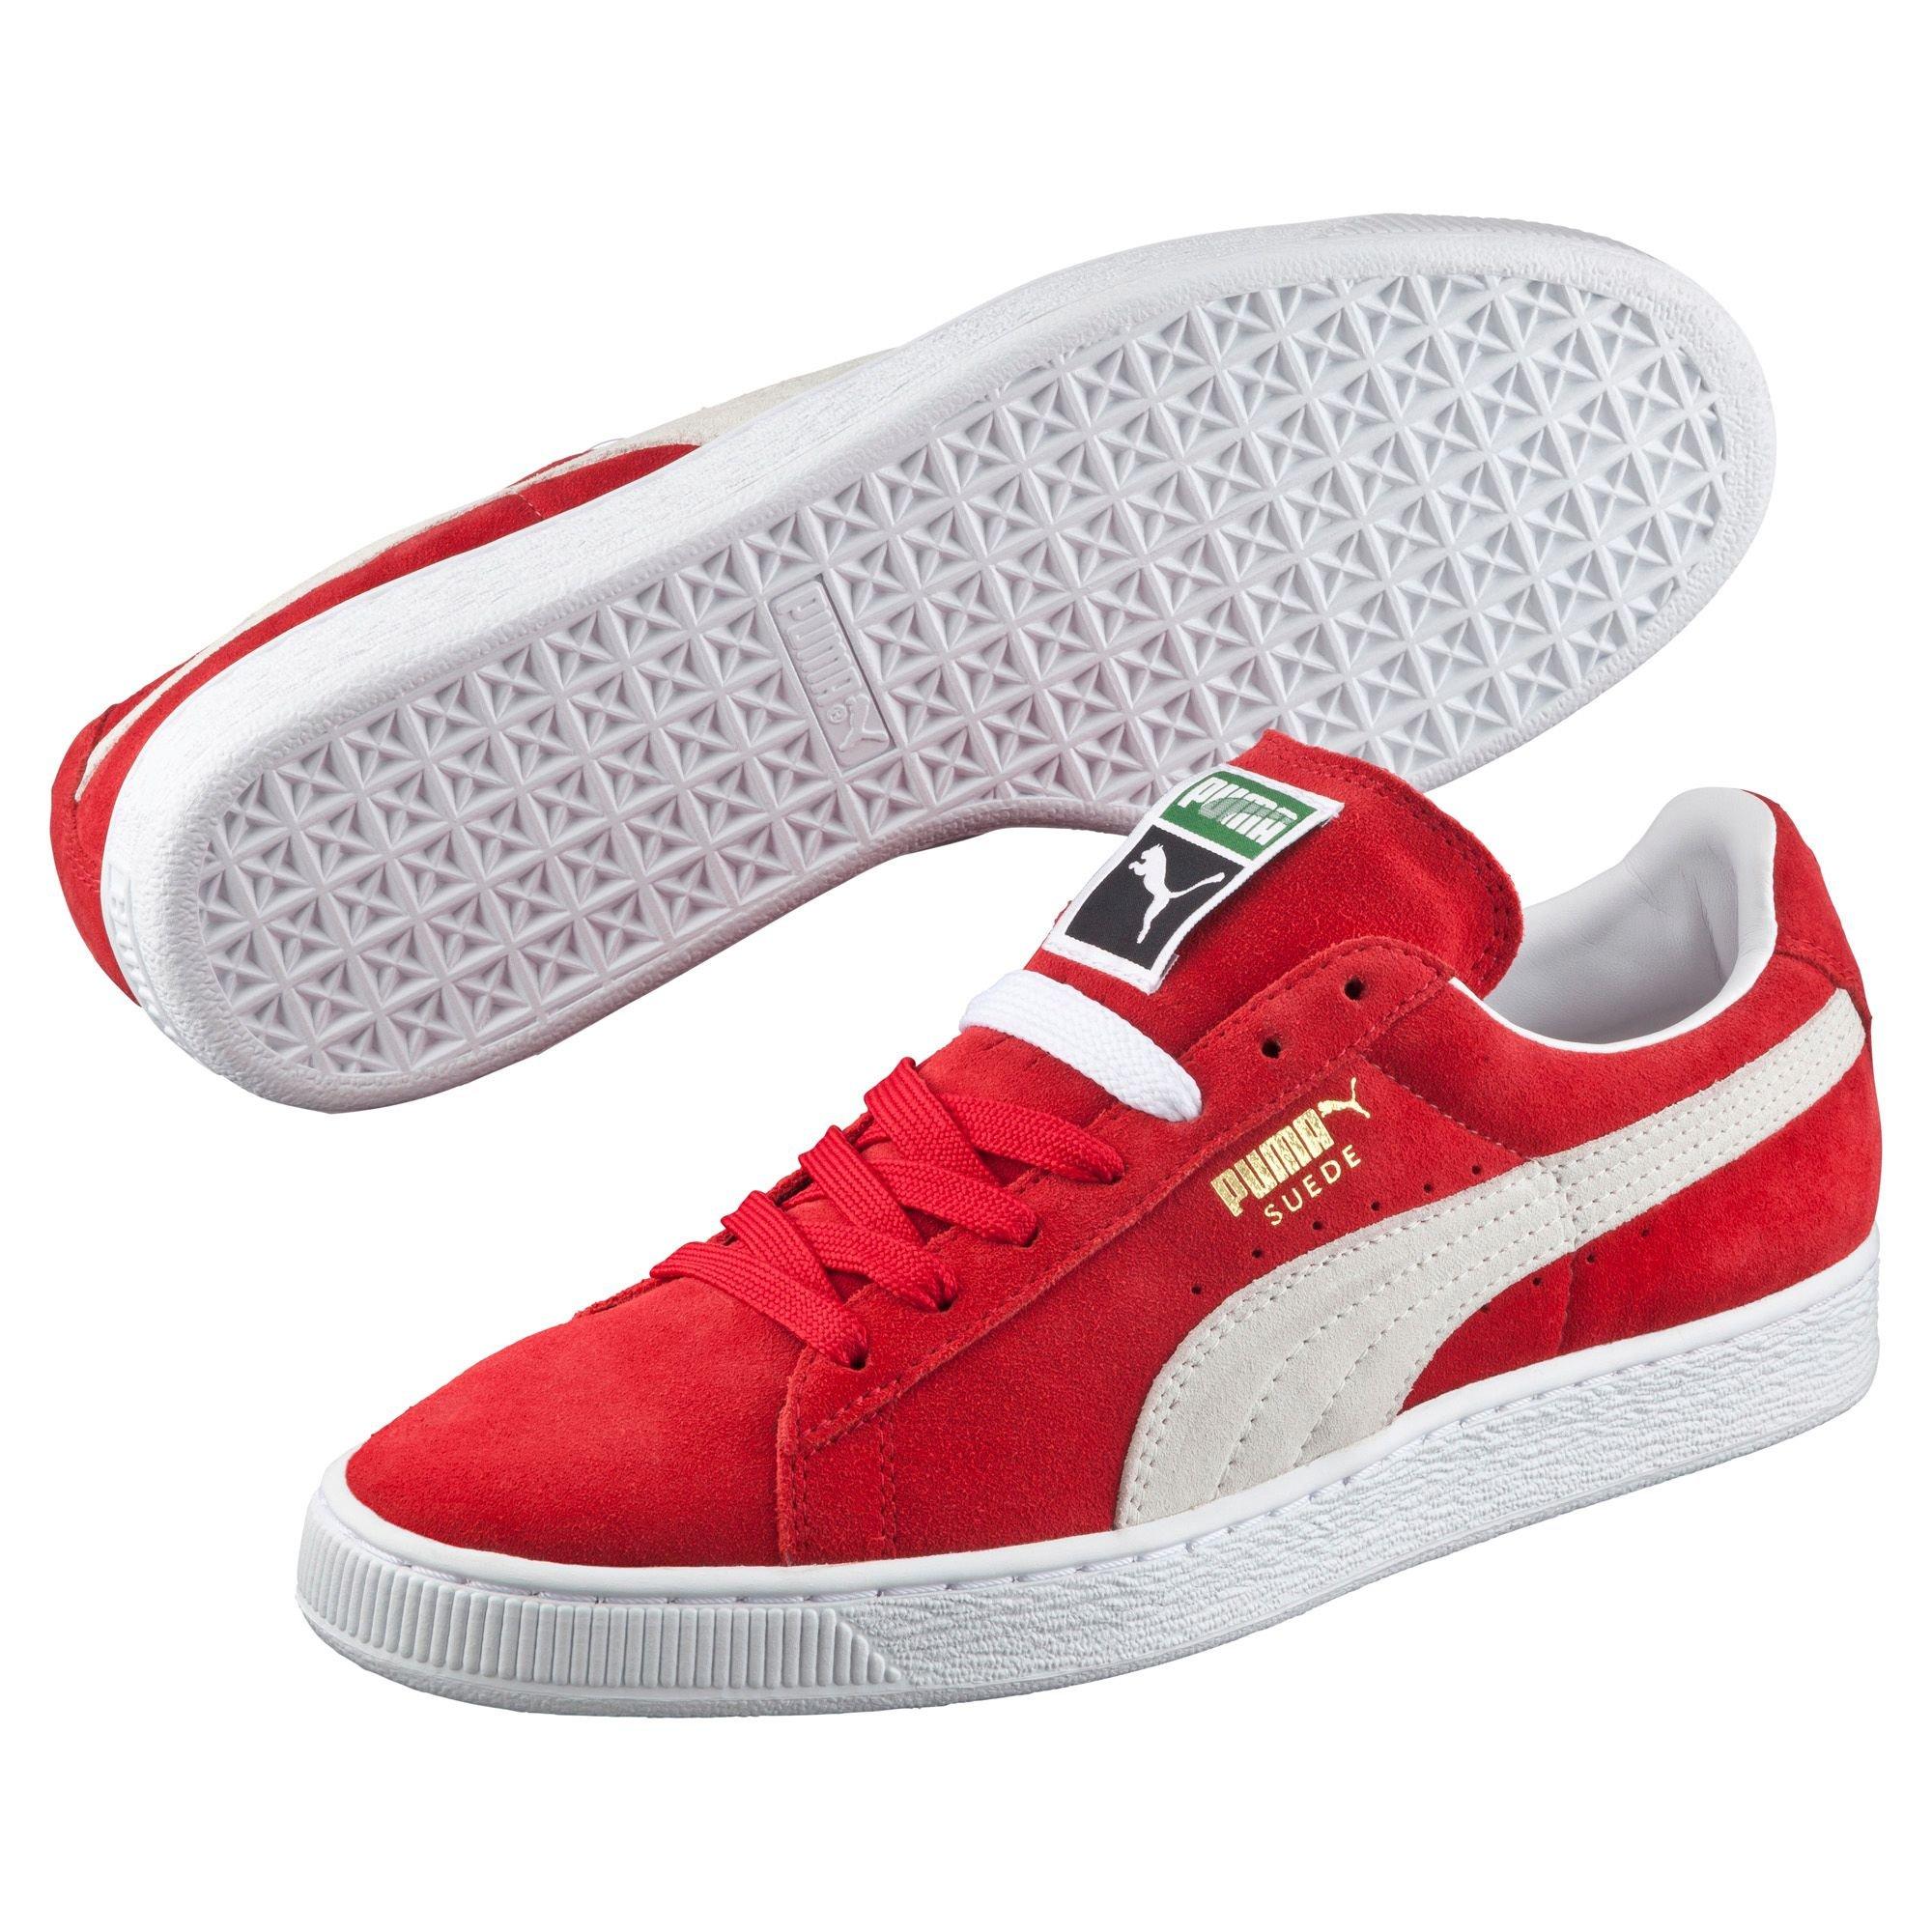 red and white puma shoes